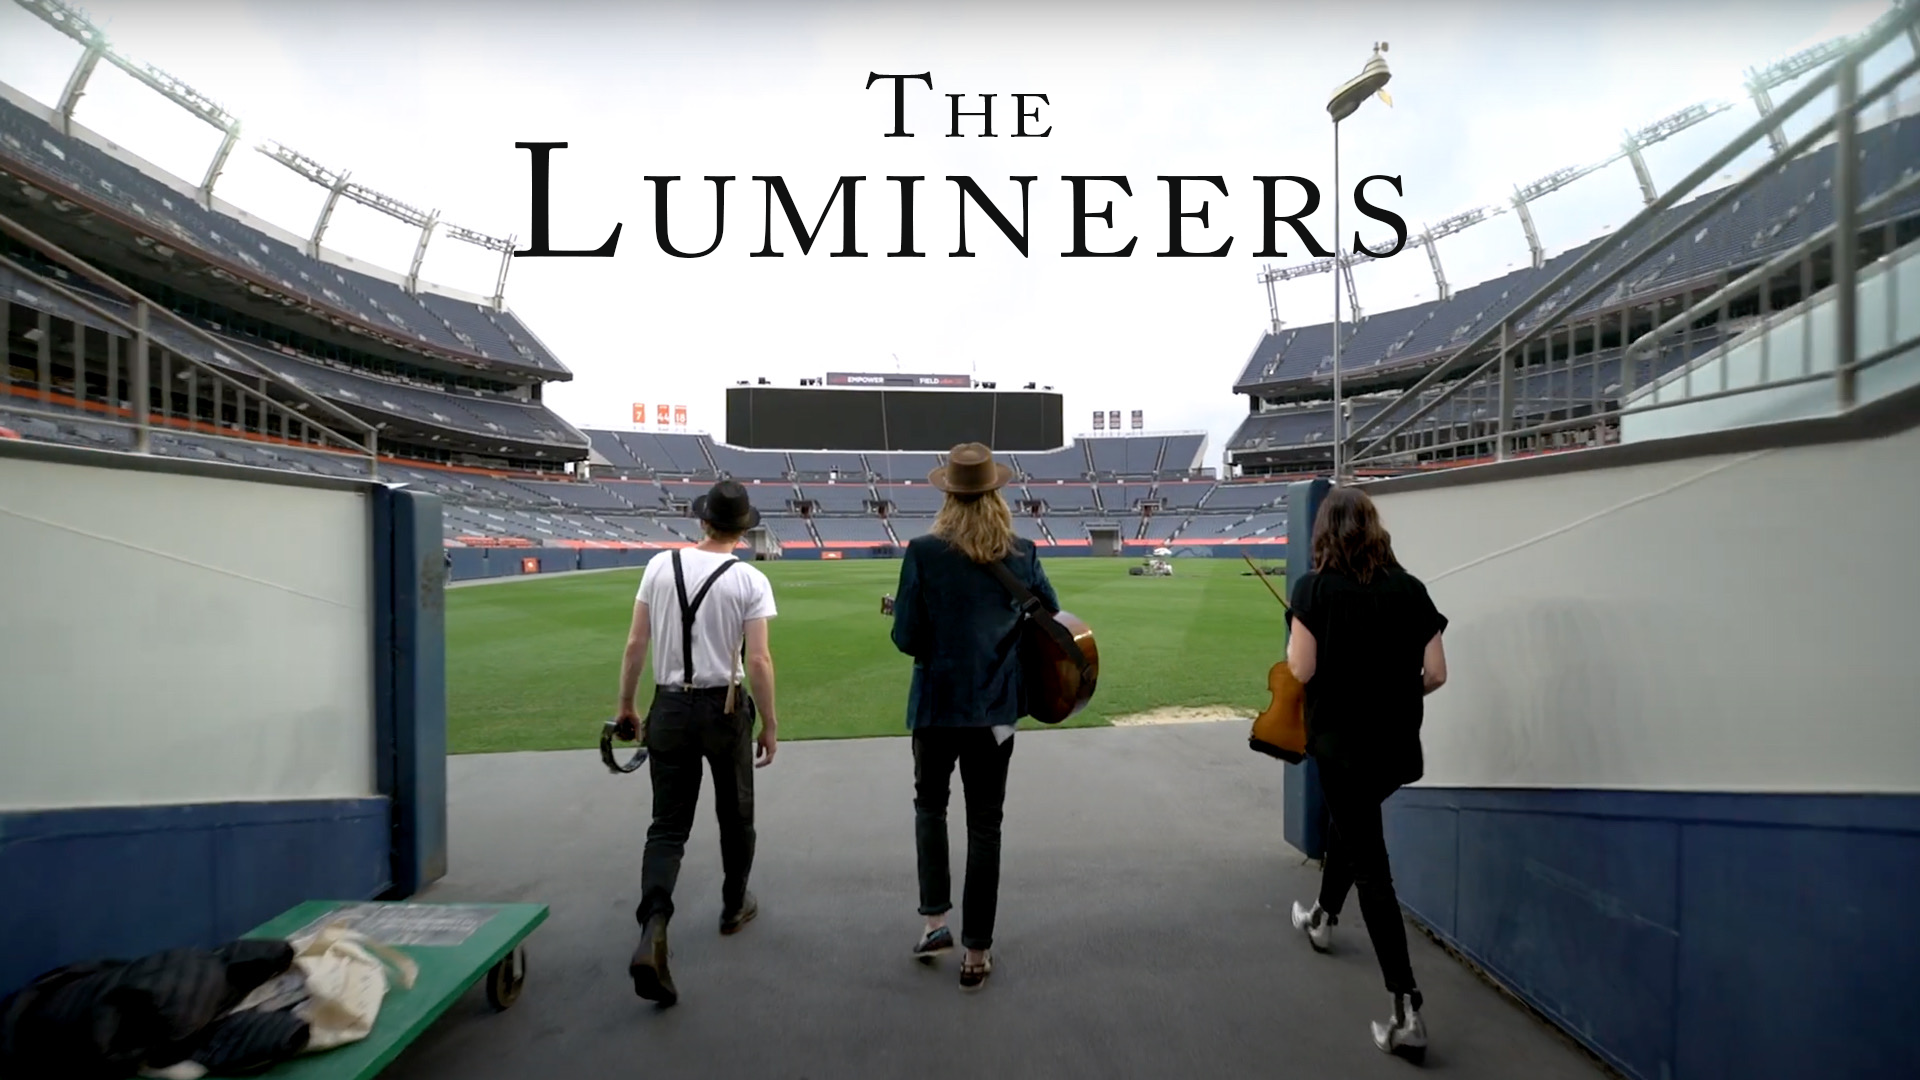 Behind the Scenes with The Lumineers